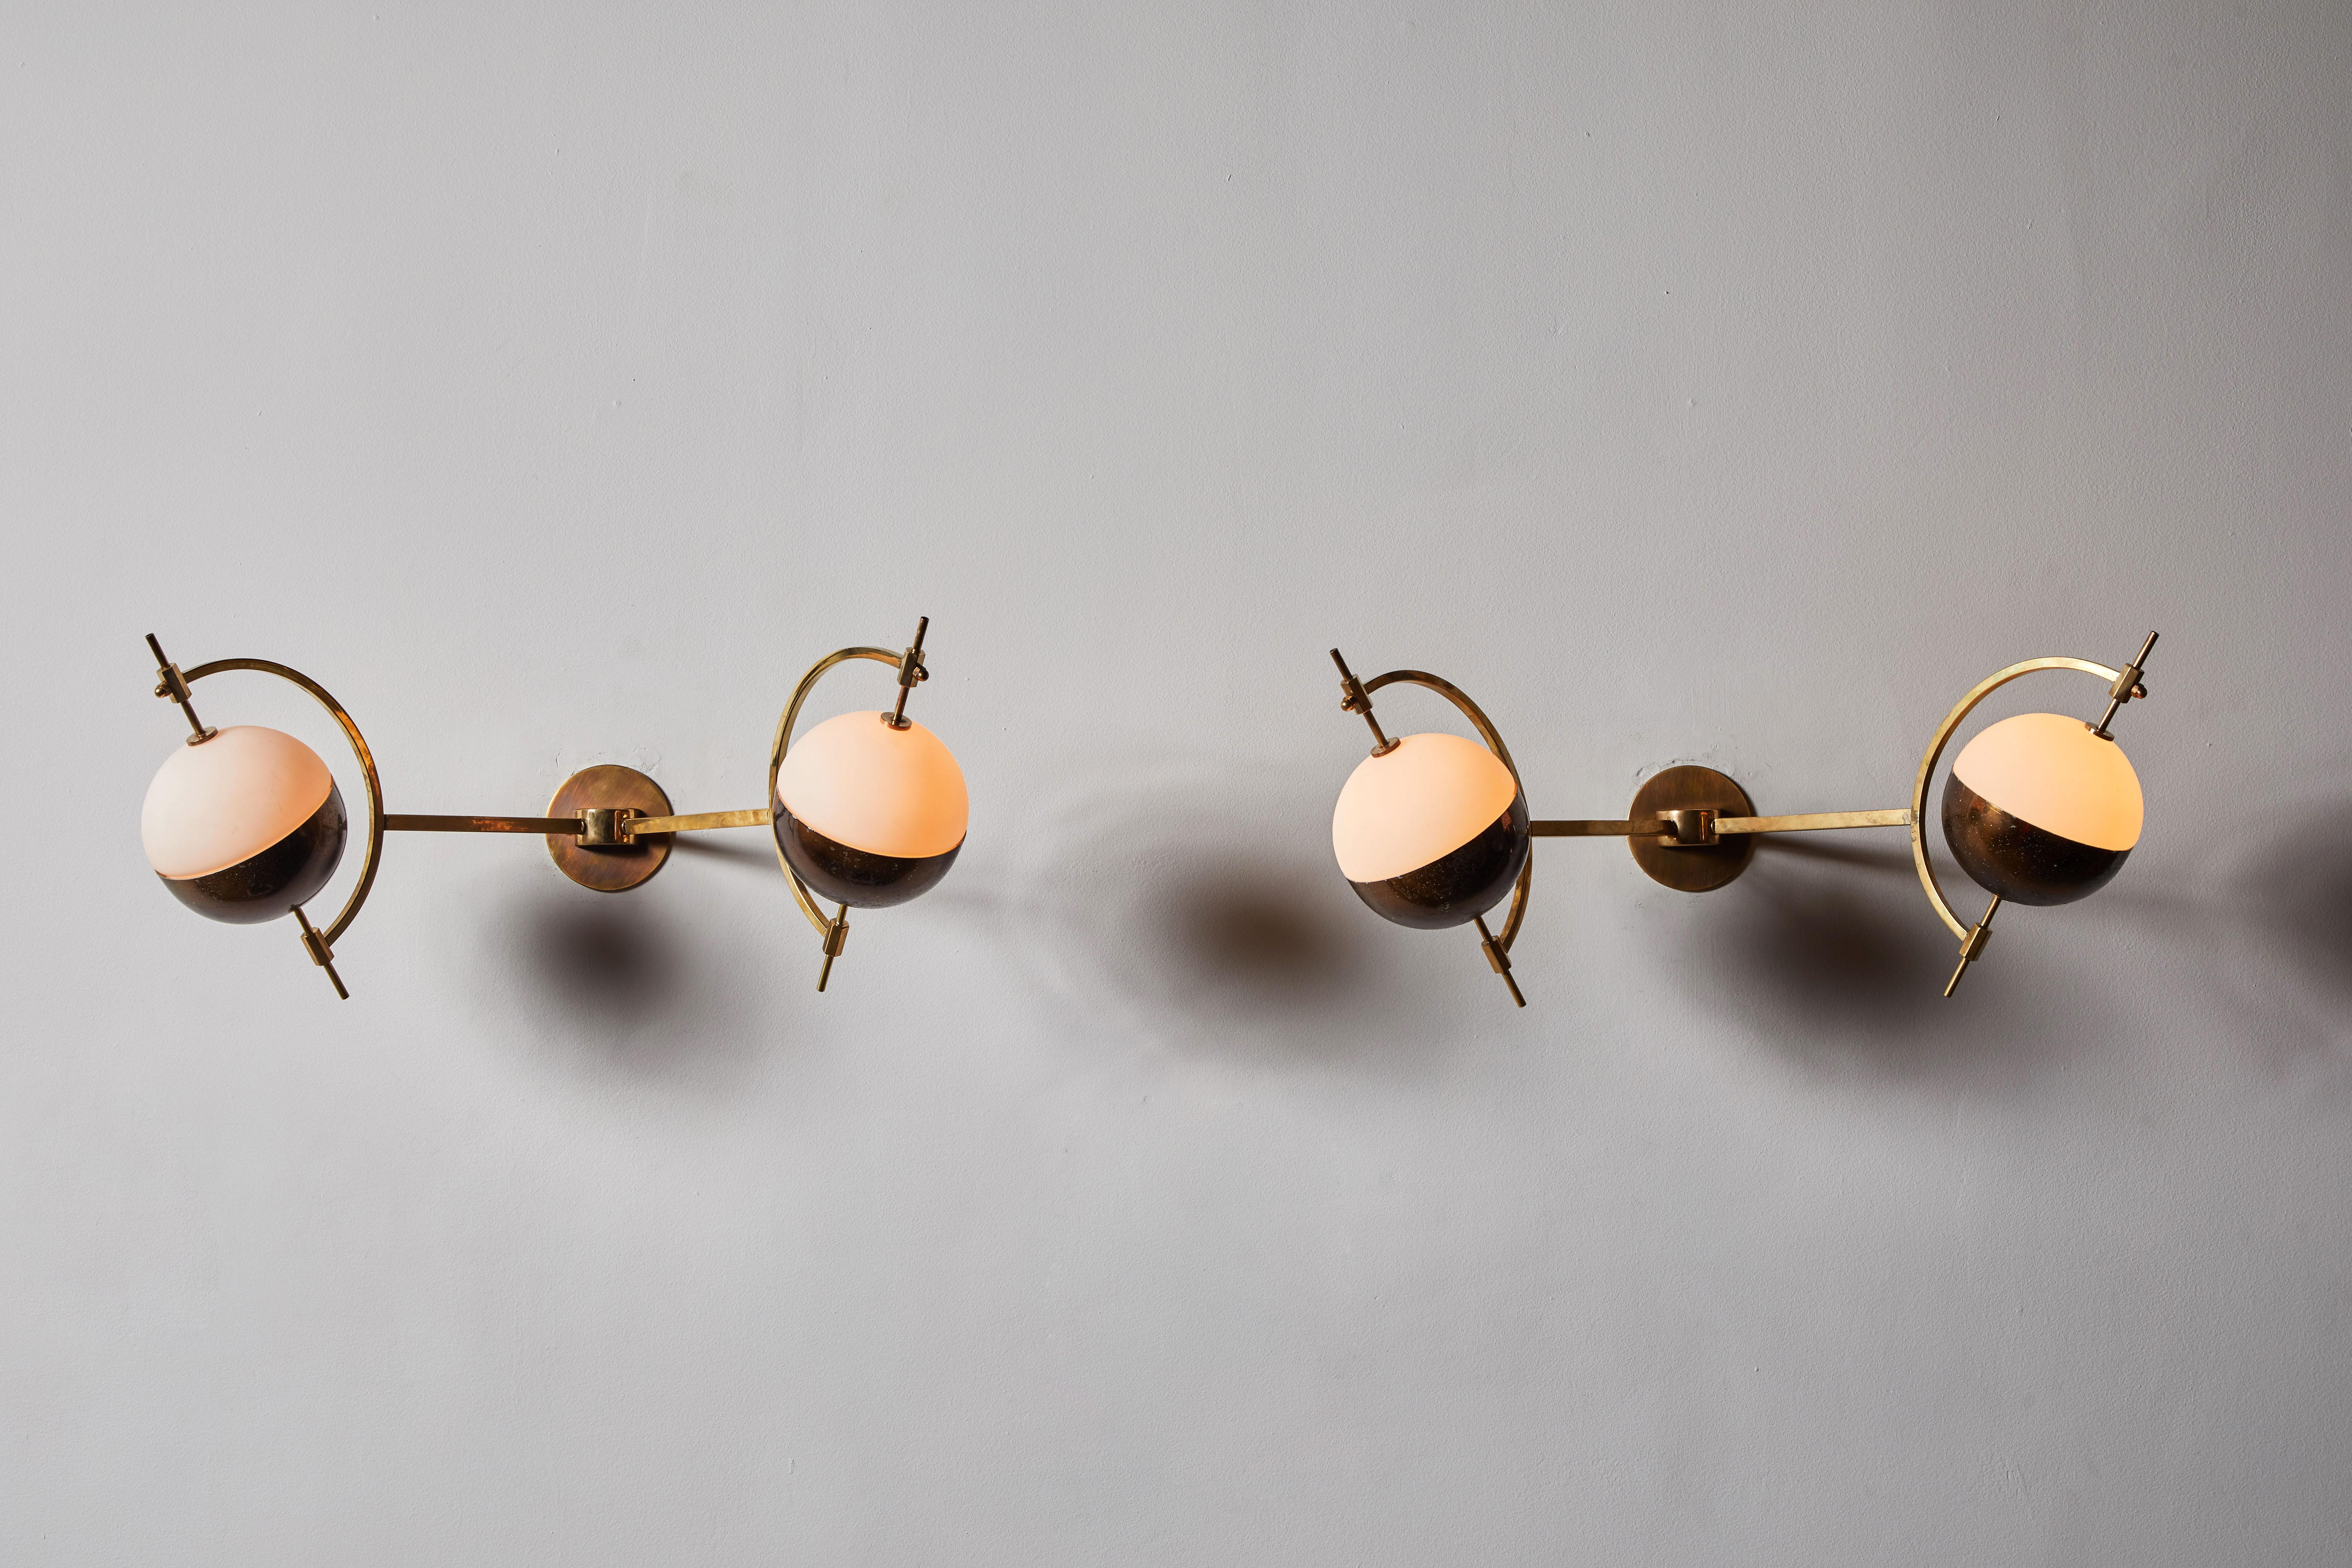 Pair of Sconces by Stilnovo. Manufactured in Italy, circa 1950s. Brass with brushed satin glass diffusers. Custom brass backplate. Each light takes one E27 candelabra bulbs, 40 watts/maximum. Bulbs provided as a one time courtesy.